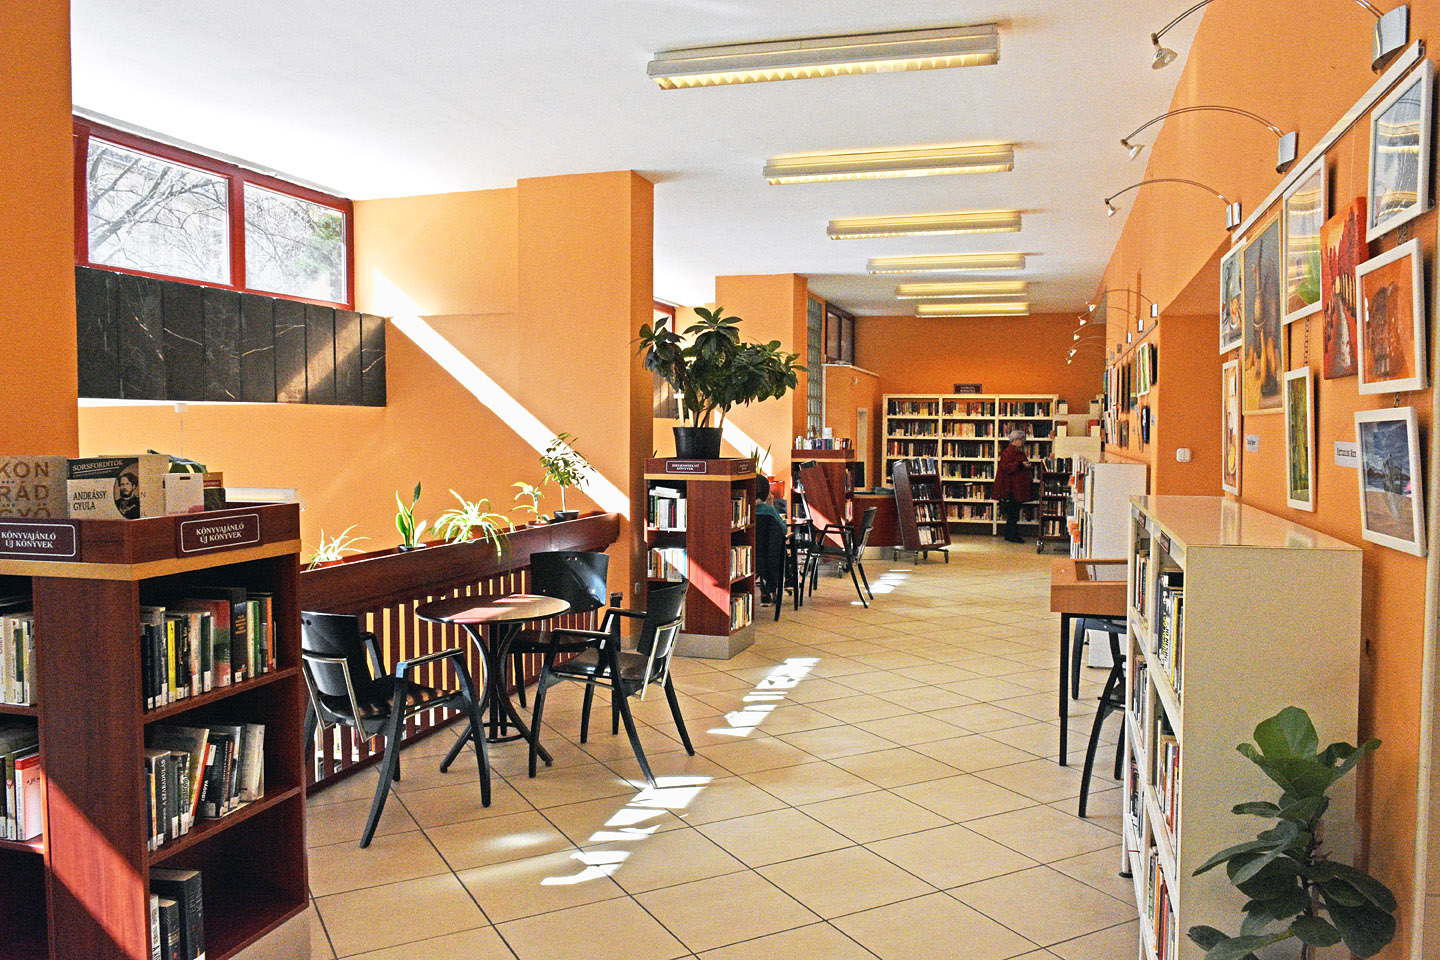 Photo about the library